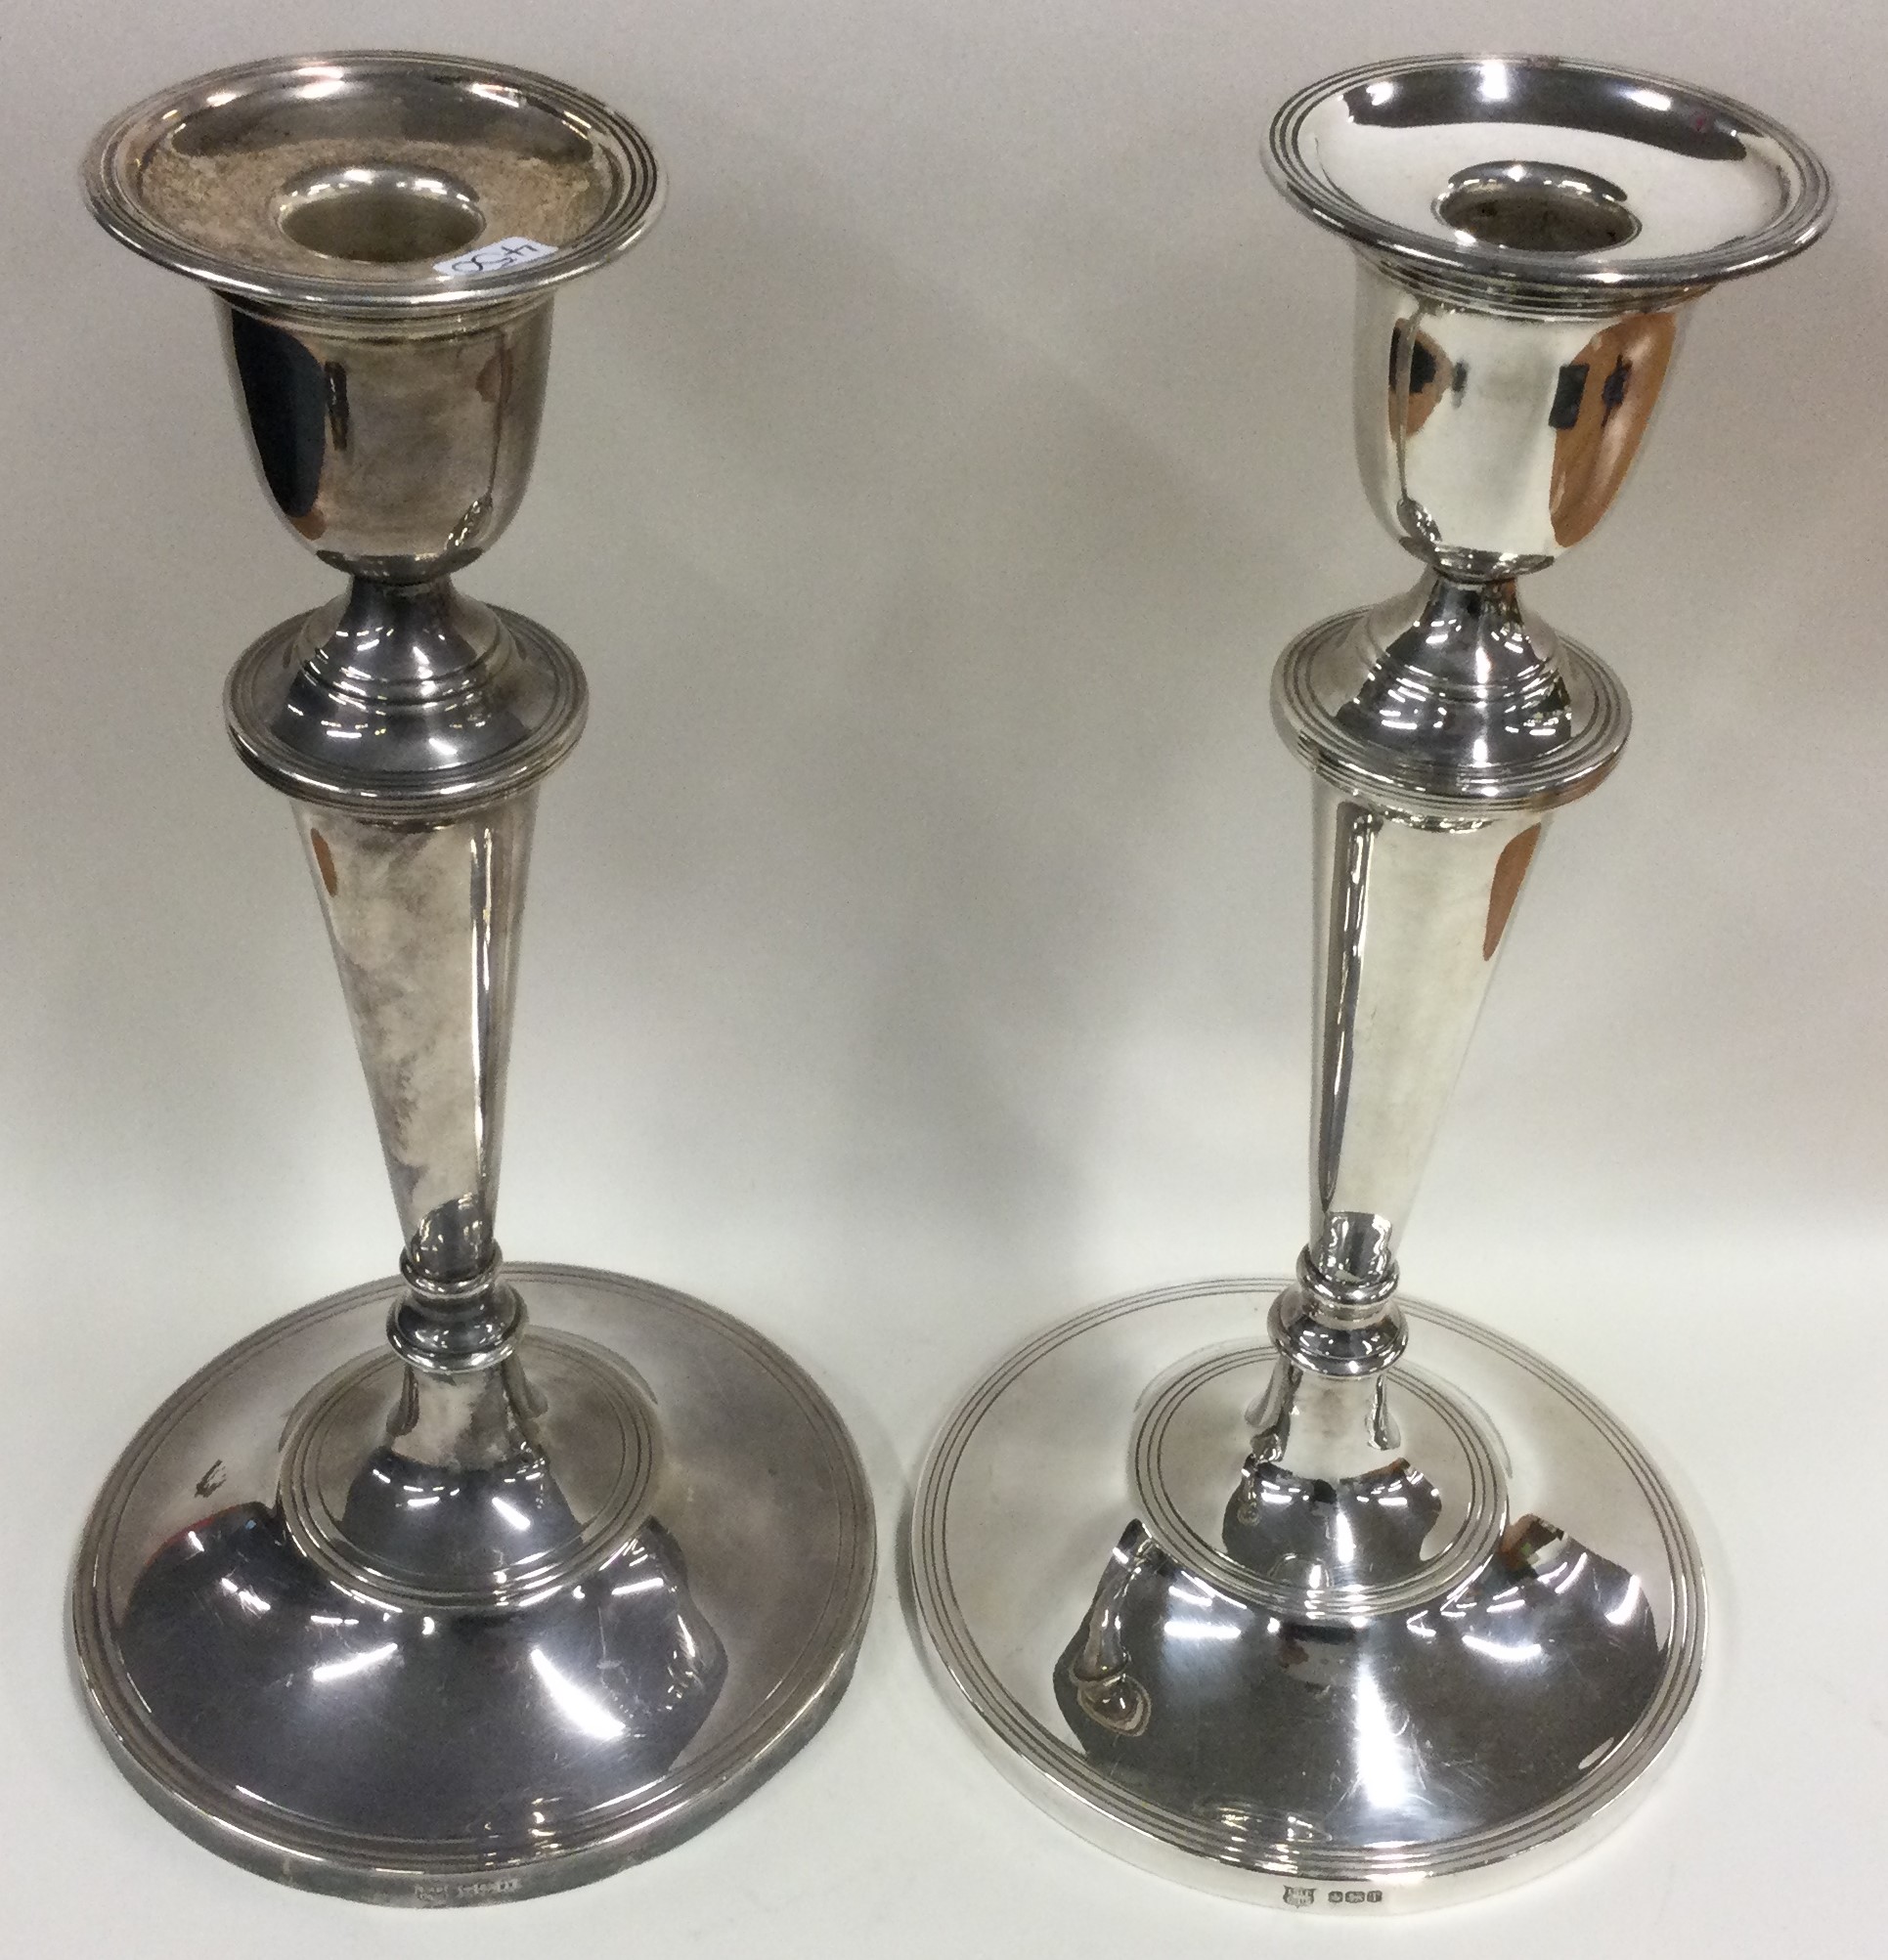 A large pair of silver candlesticks in the Georgian style. - Image 2 of 2